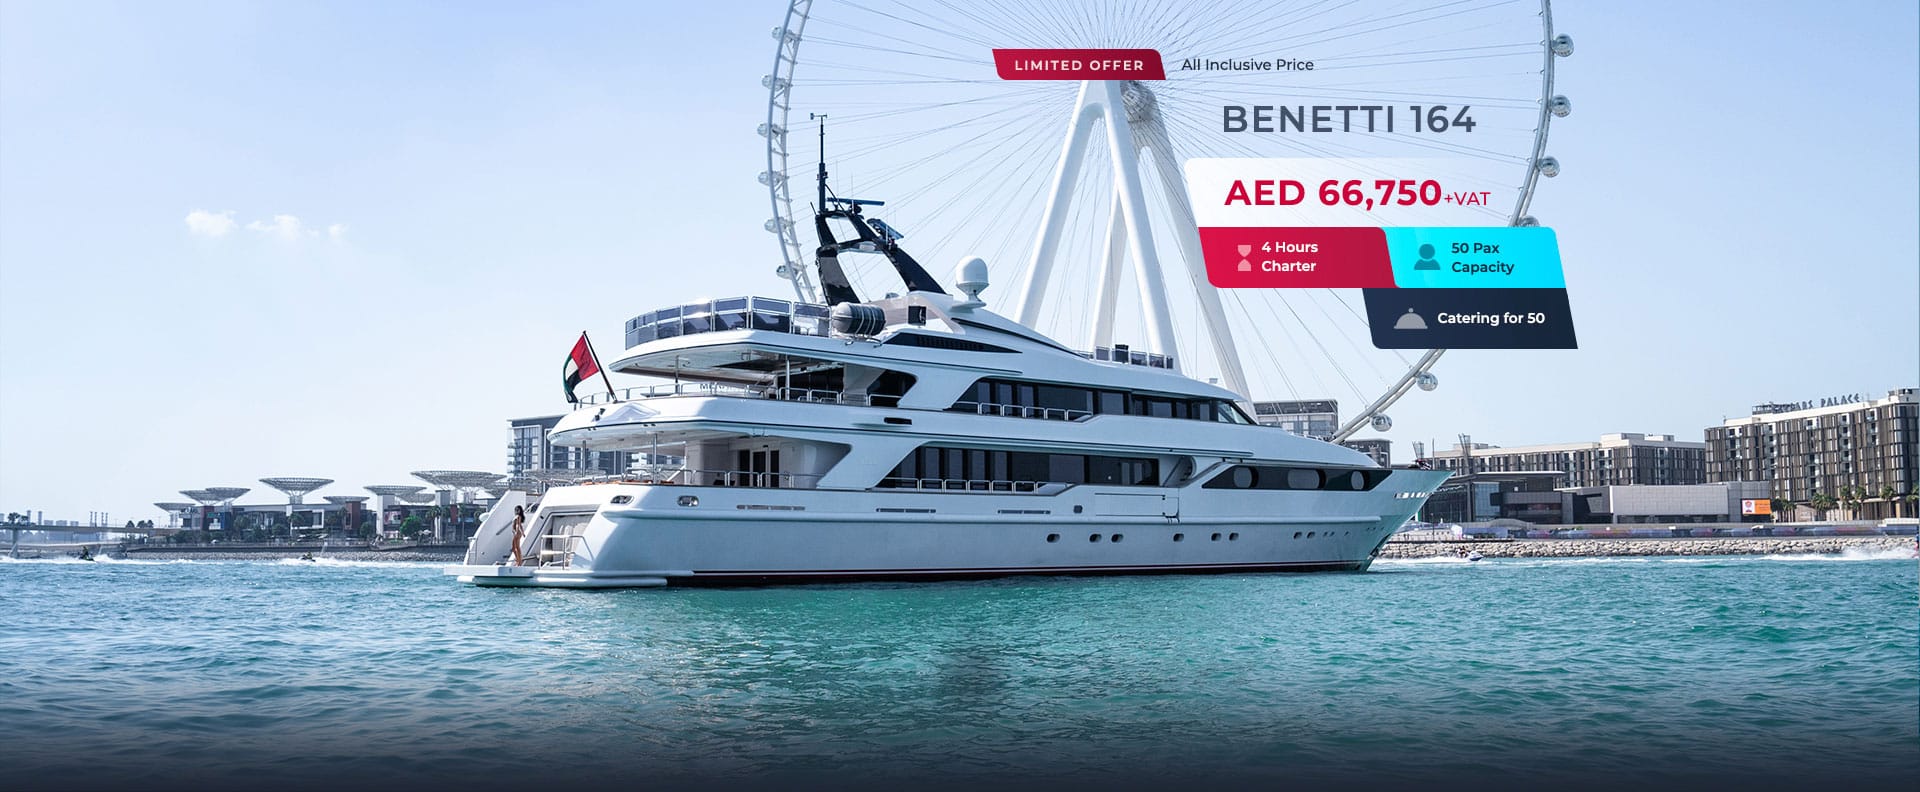 Benetti Limited Offer